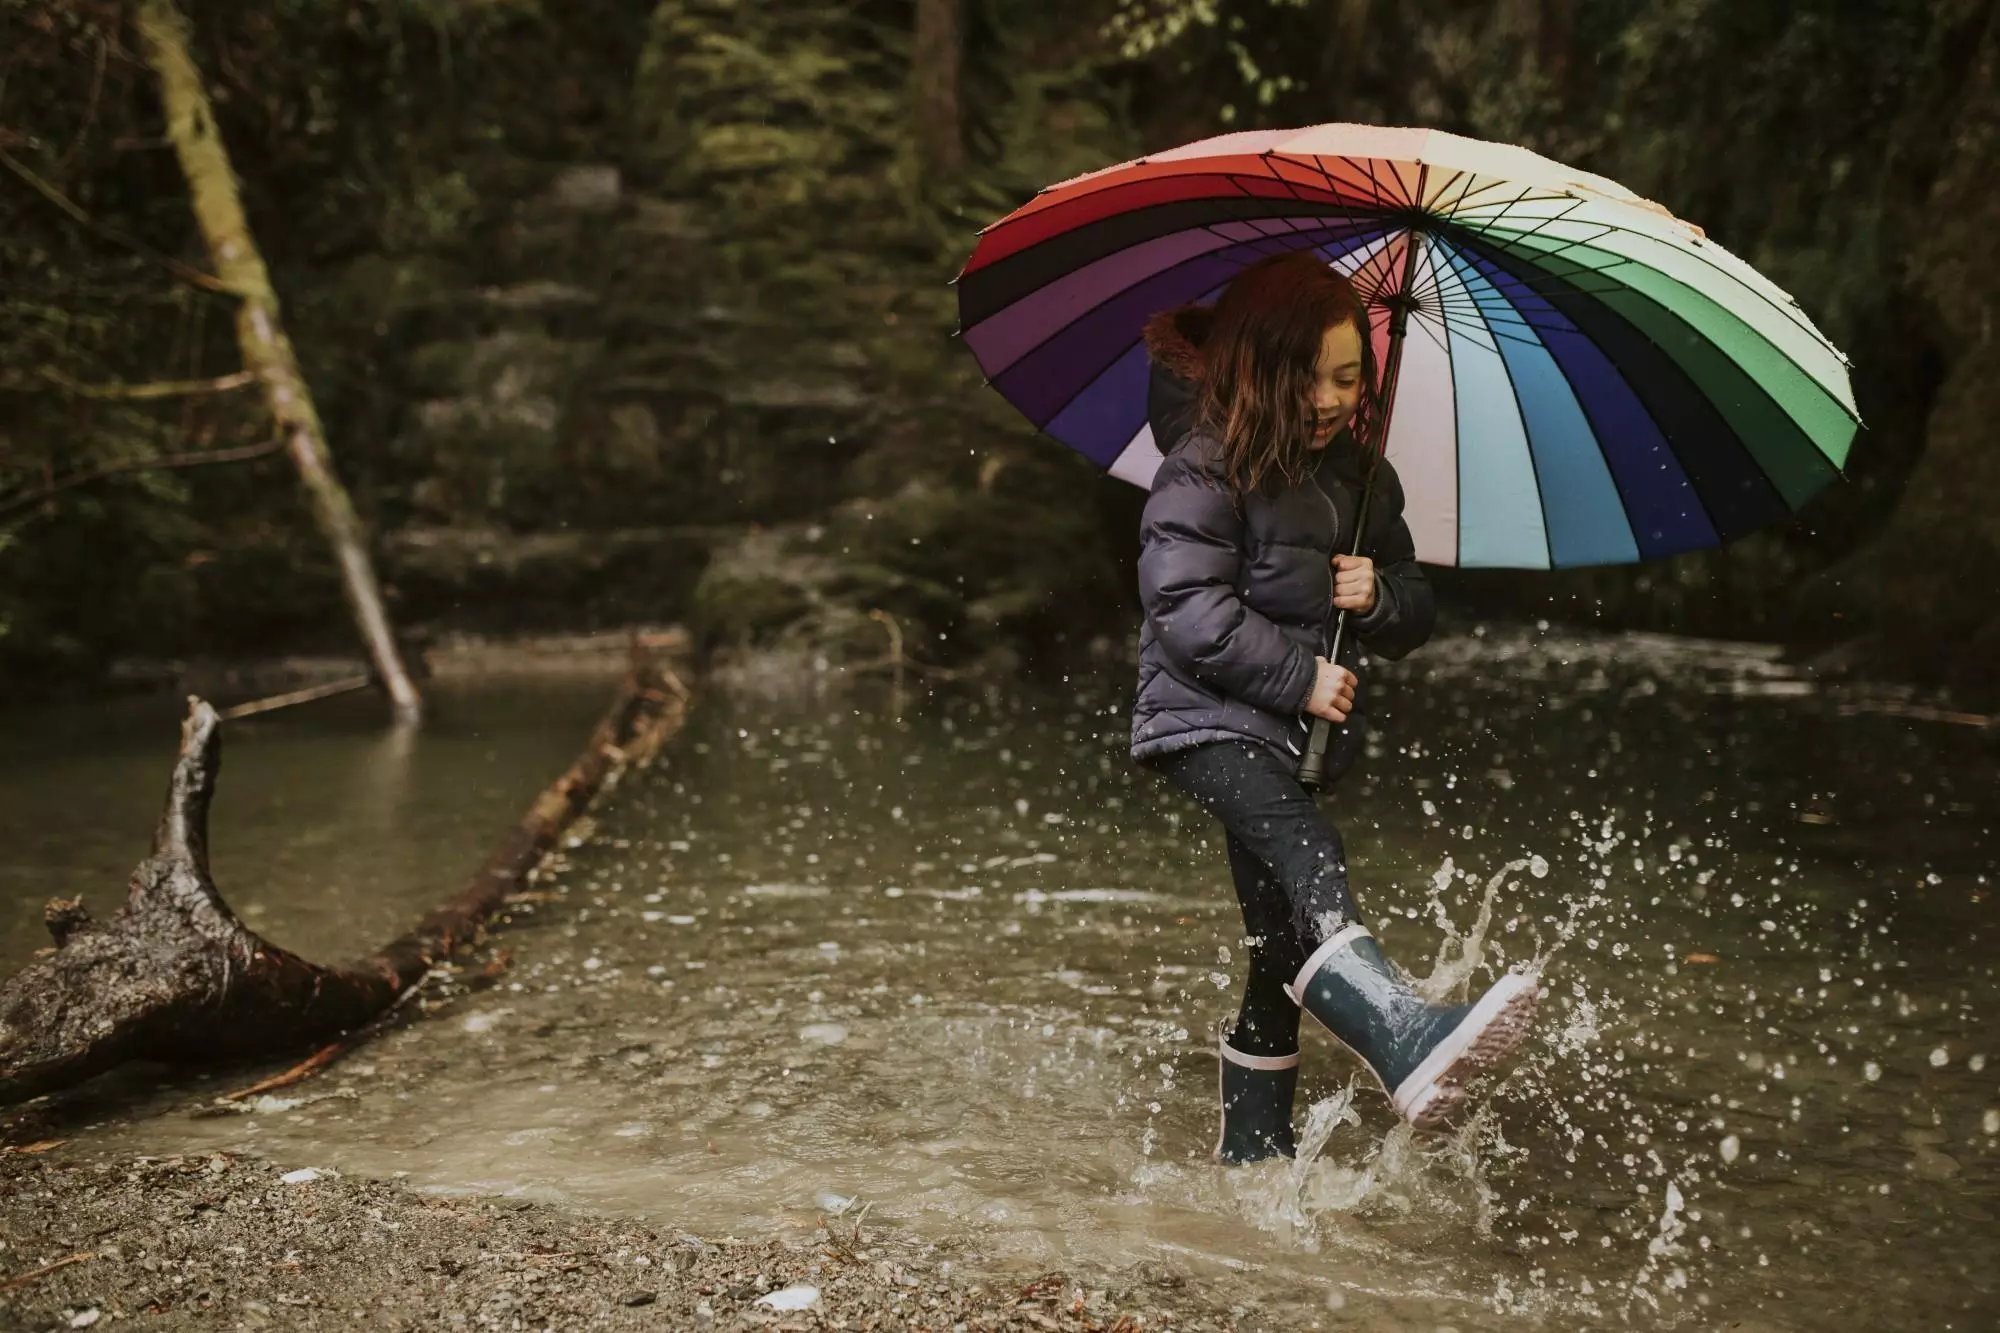 A happy girl playing by the forest lake with an umbrella on a rainy day